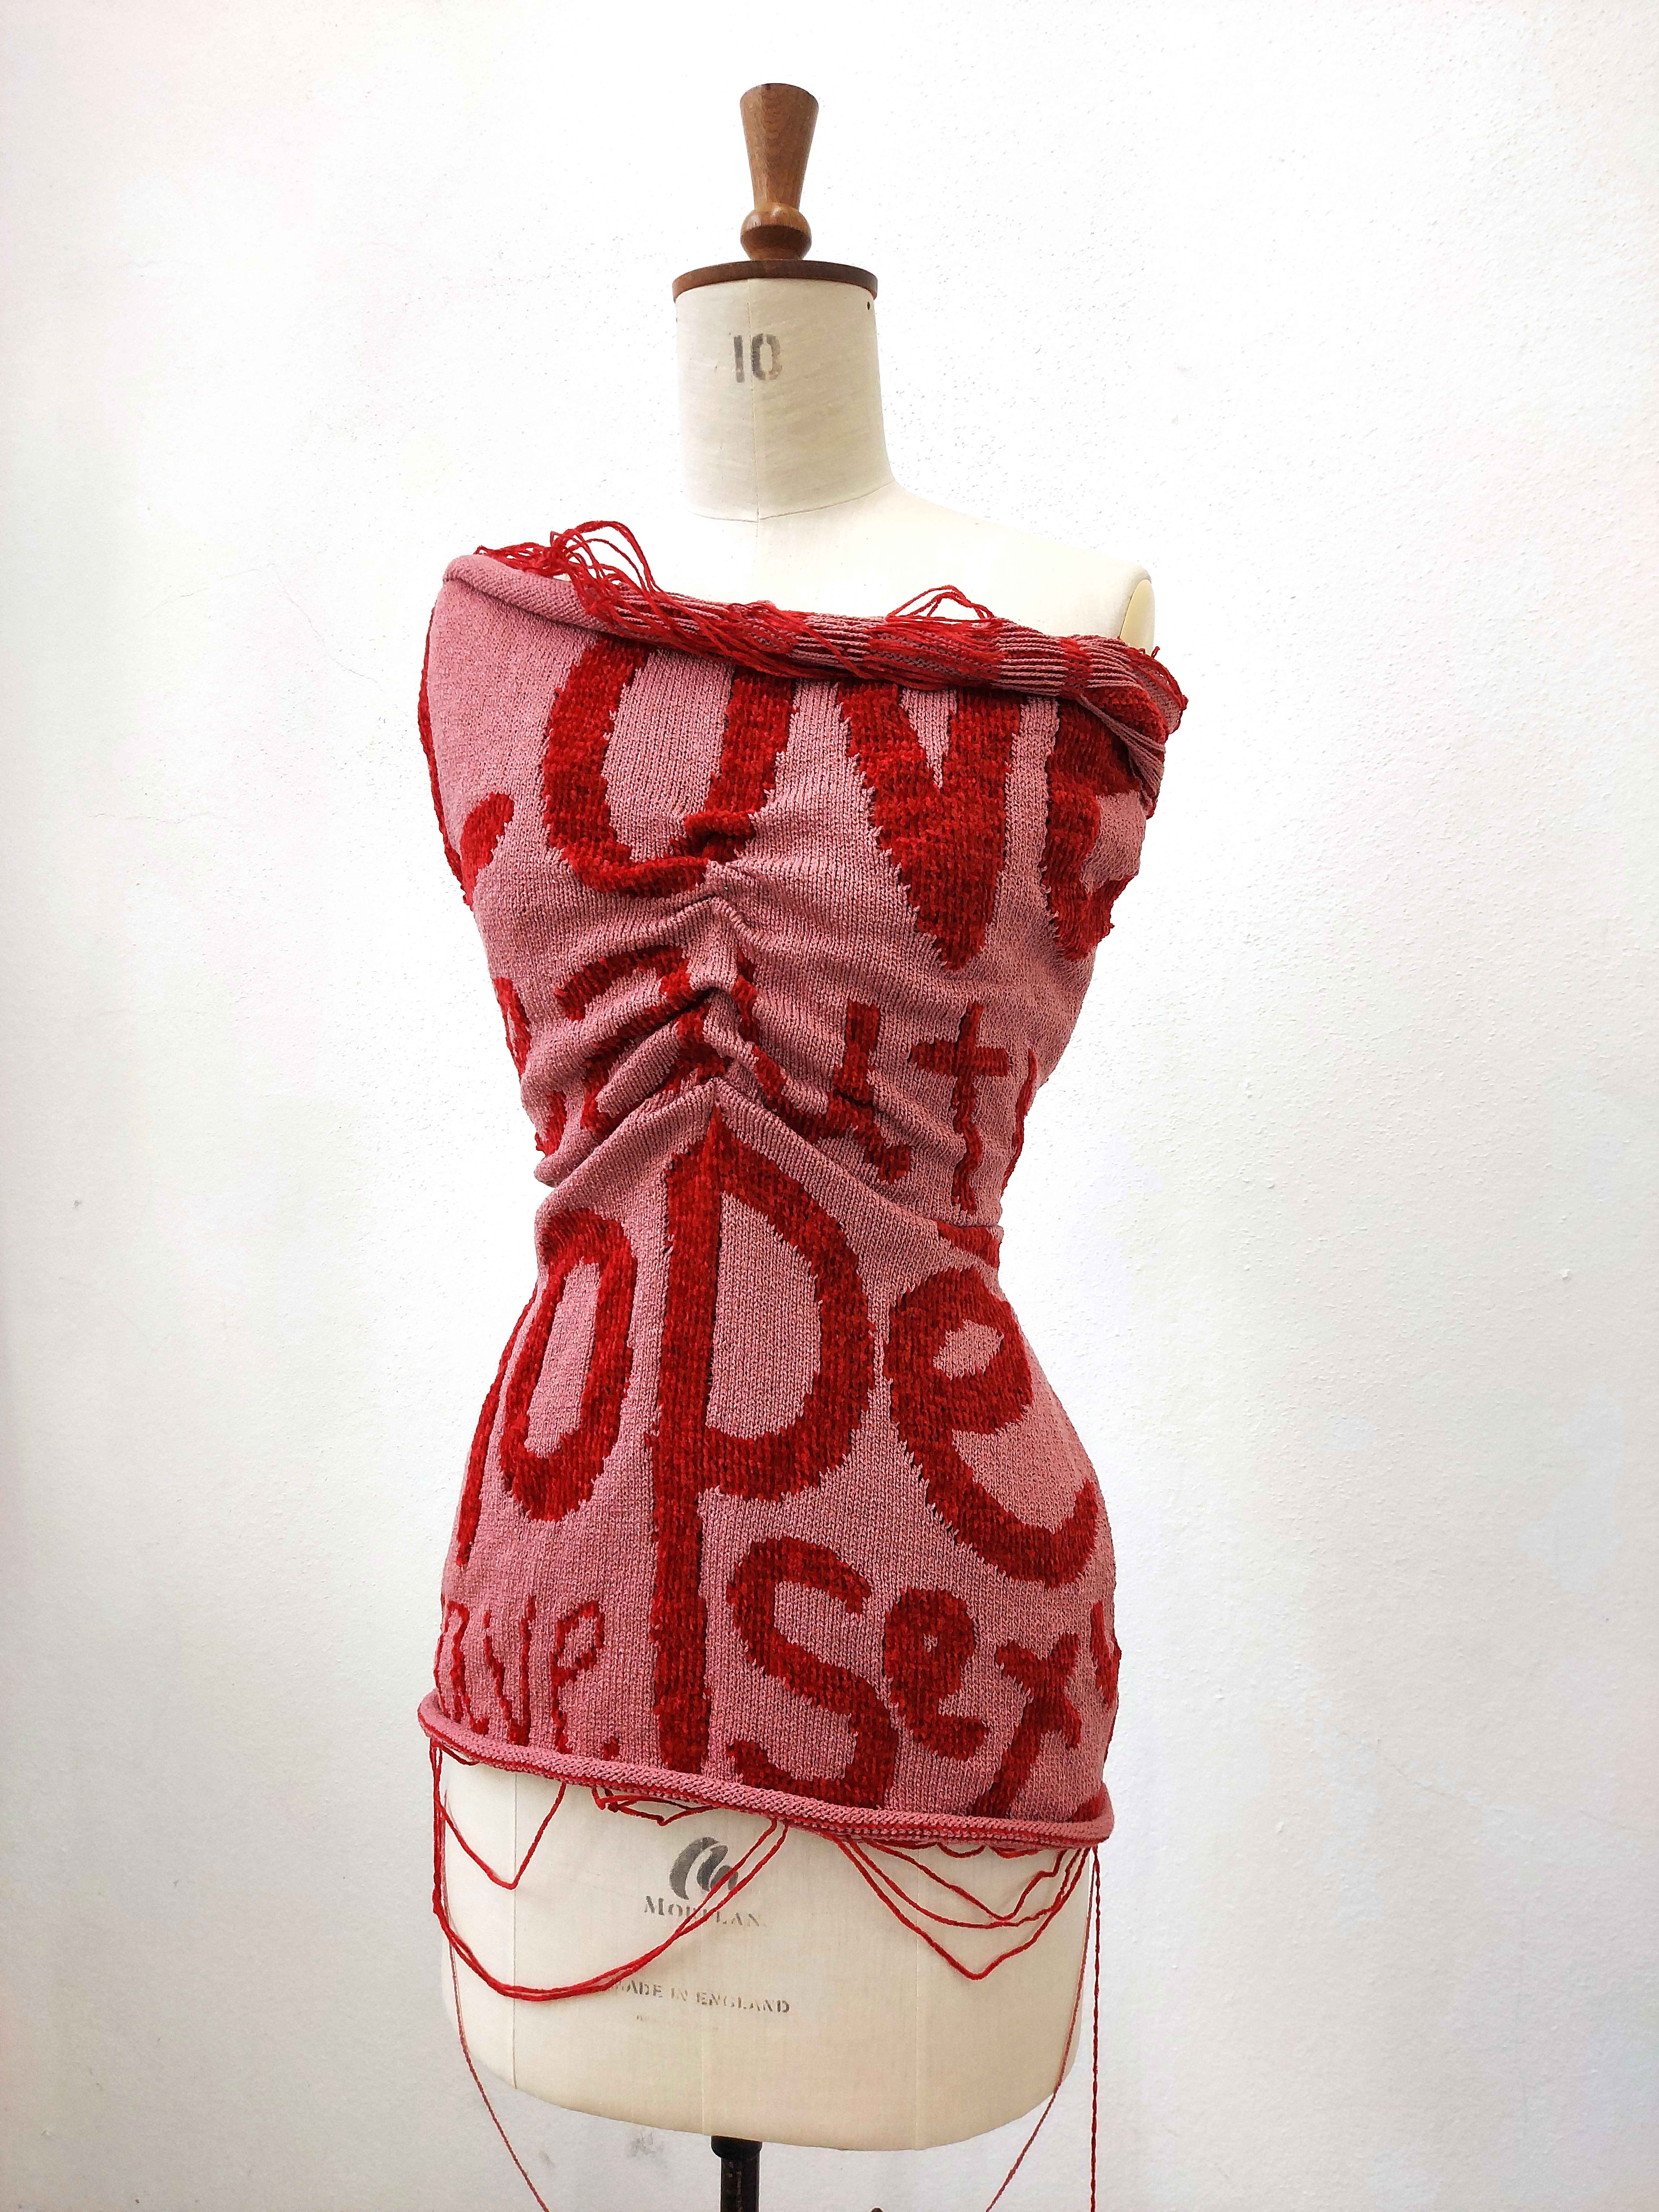 BA Textile Design work by Hollie Cooper raising awareness of breast cancer through the beauty of 'knitted skin' fabrics